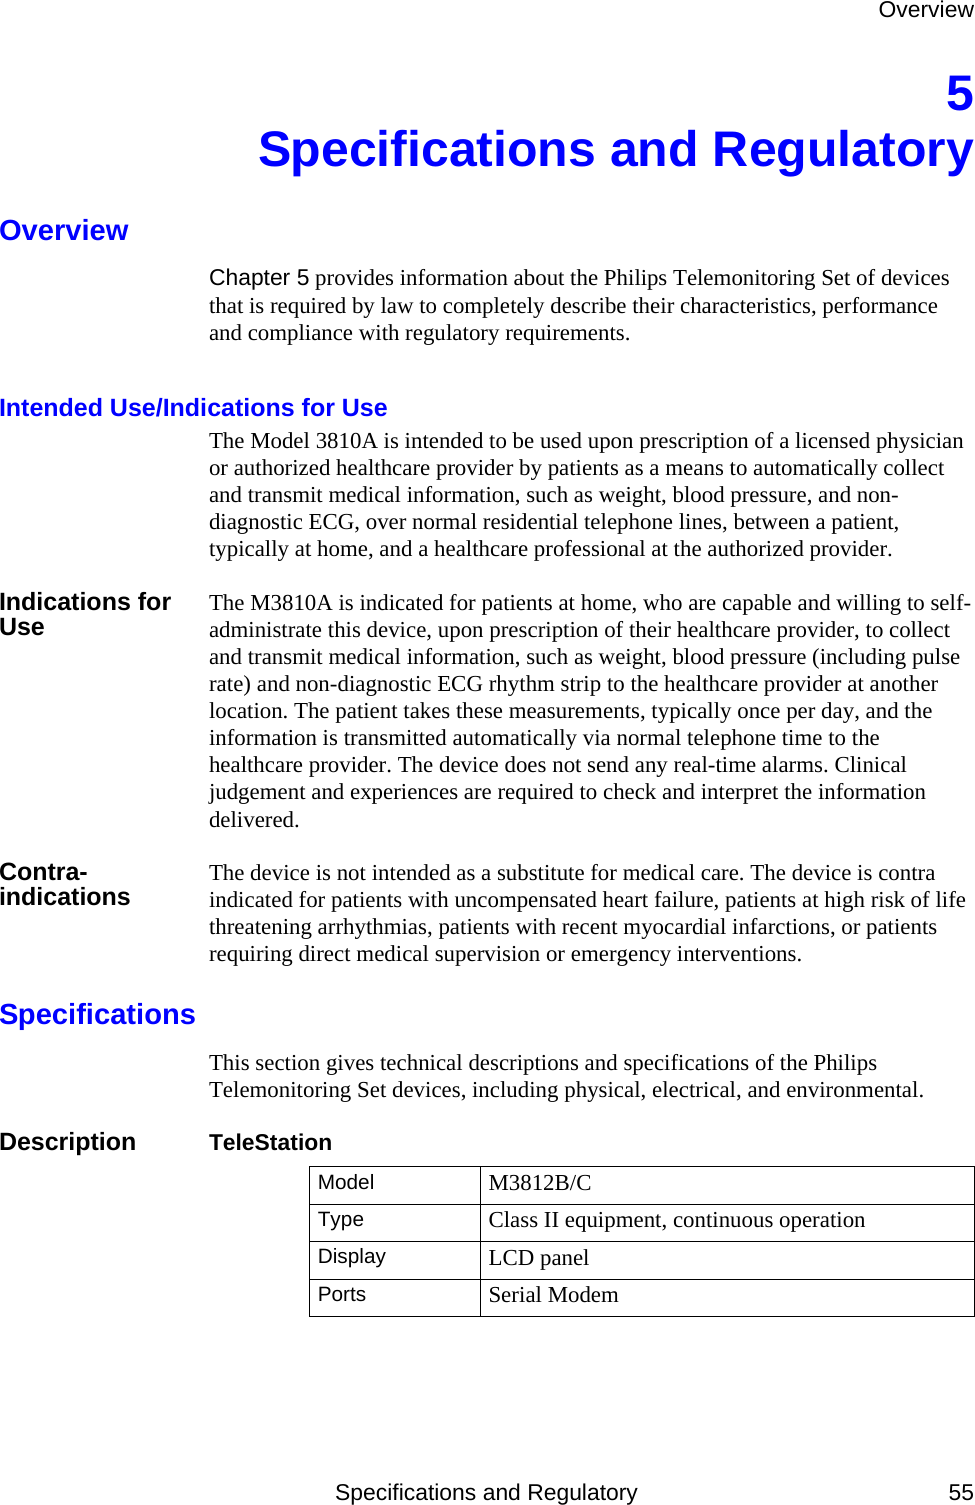 OverviewSpecifications and Regulatory 555Specifications and RegulatoryOverviewChapter 5 provides information about the Philips Telemonitoring Set of devices that is required by law to completely describe their characteristics, performance and compliance with regulatory requirements. Intended Use/Indications for UseThe Model 3810A is intended to be used upon prescription of a licensed physician or authorized healthcare provider by patients as a means to automatically collect and transmit medical information, such as weight, blood pressure, and non-diagnostic ECG, over normal residential telephone lines, between a patient, typically at home, and a healthcare professional at the authorized provider.Indications for Use The M3810A is indicated for patients at home, who are capable and willing to self-administrate this device, upon prescription of their healthcare provider, to collect and transmit medical information, such as weight, blood pressure (including pulse rate) and non-diagnostic ECG rhythm strip to the healthcare provider at another location. The patient takes these measurements, typically once per day, and the information is transmitted automatically via normal telephone time to the healthcare provider. The device does not send any real-time alarms. Clinical judgement and experiences are required to check and interpret the information delivered.Contra-indications The device is not intended as a substitute for medical care. The device is contra indicated for patients with uncompensated heart failure, patients at high risk of life threatening arrhythmias, patients with recent myocardial infarctions, or patients requiring direct medical supervision or emergency interventions.SpecificationsThis section gives technical descriptions and specifications of the Philips Telemonitoring Set devices, including physical, electrical, and environmental.Description TeleStationModel M3812B/CType Class II equipment, continuous operationDisplay LCD panelPorts Serial Modem